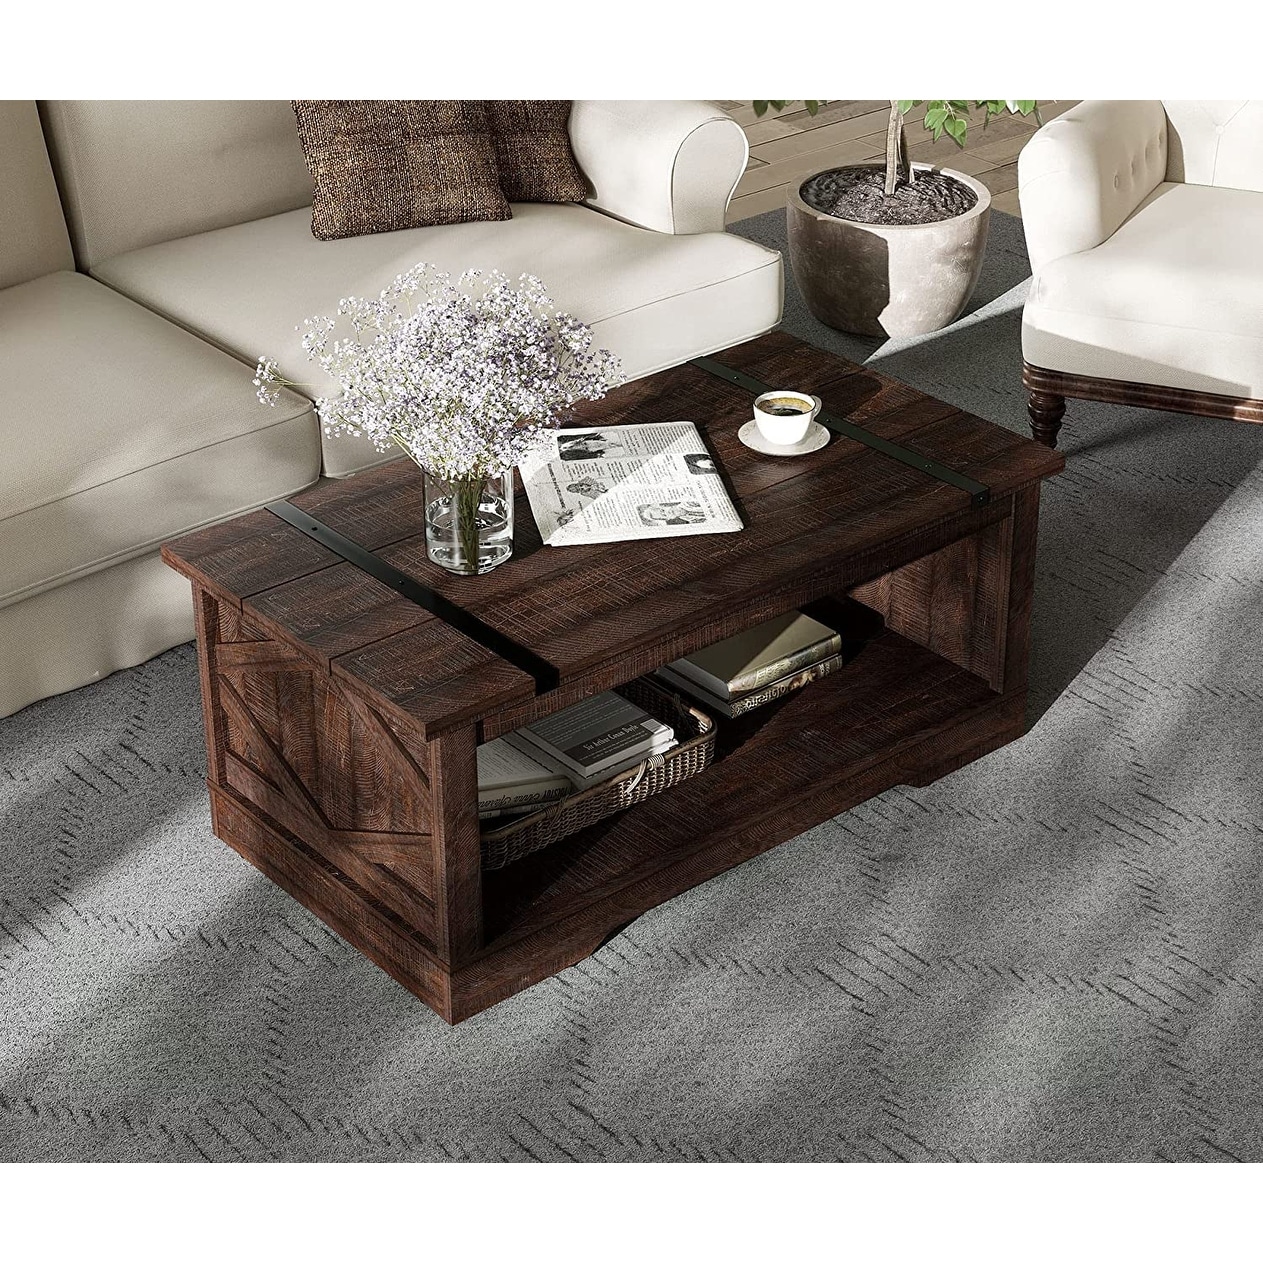 Rustic Coffee Tables: 42 x 42 Barnwood Square Open Coffee Table